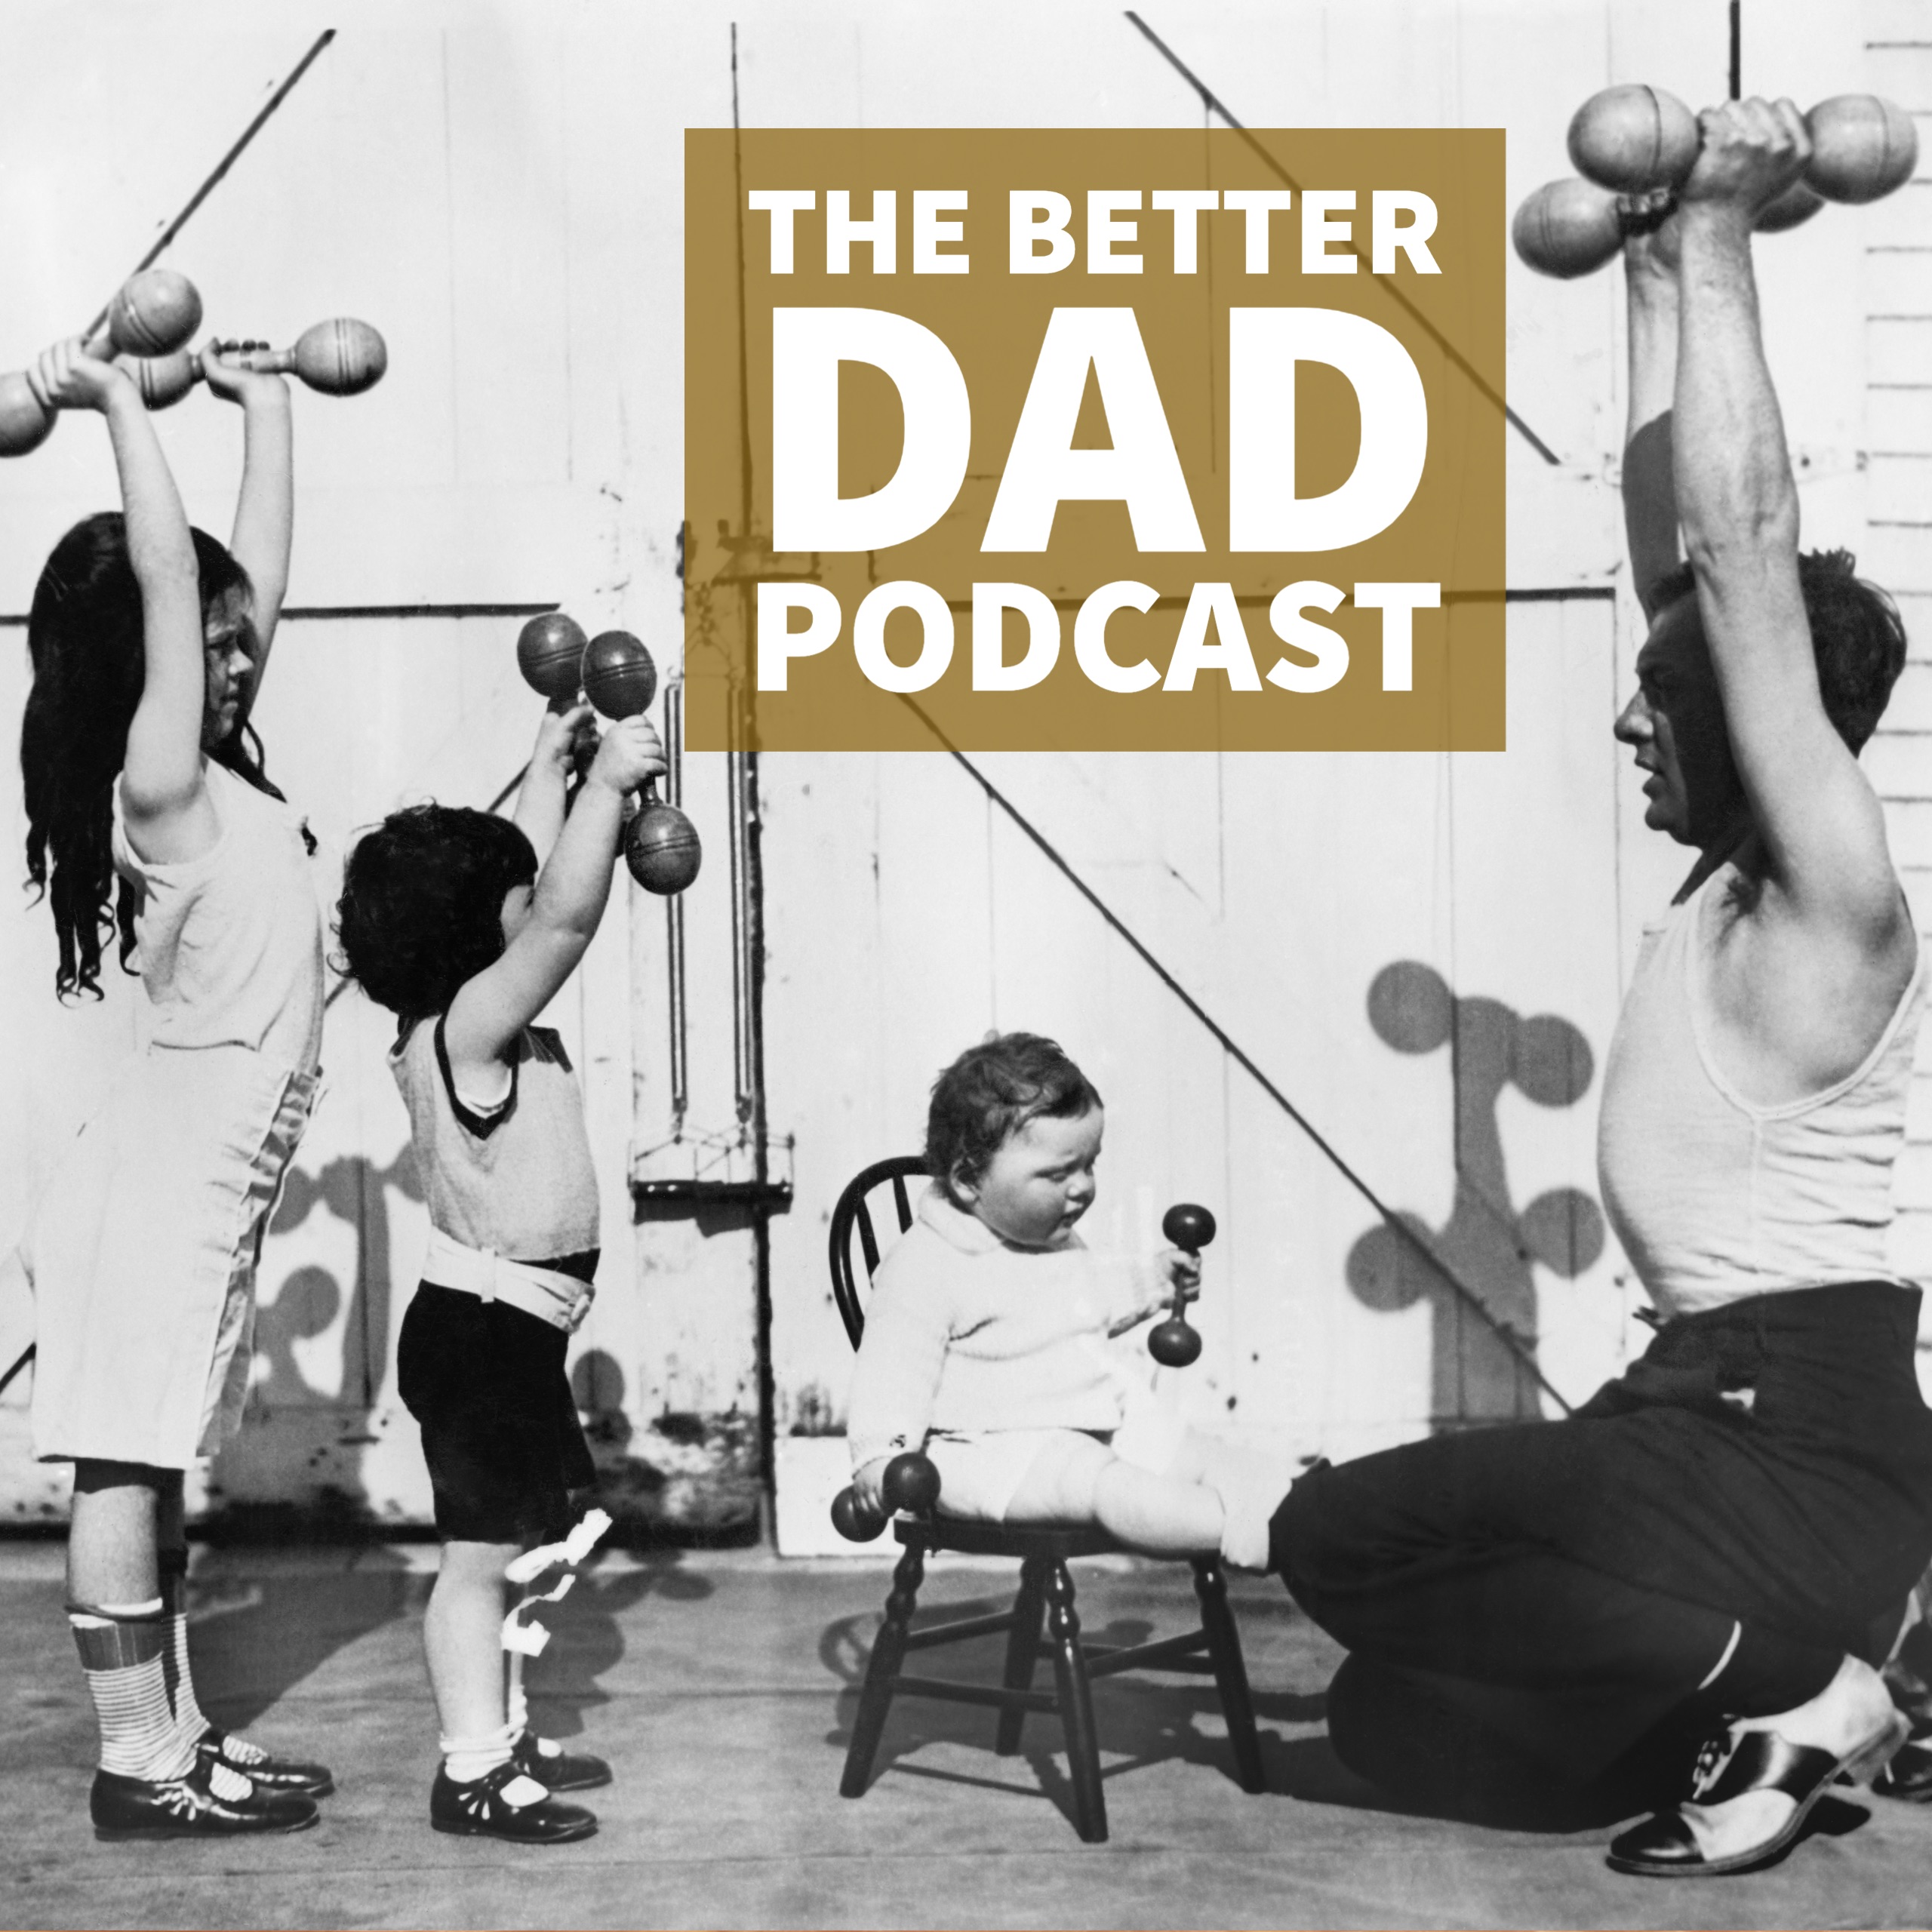 The Better Dad Podcast